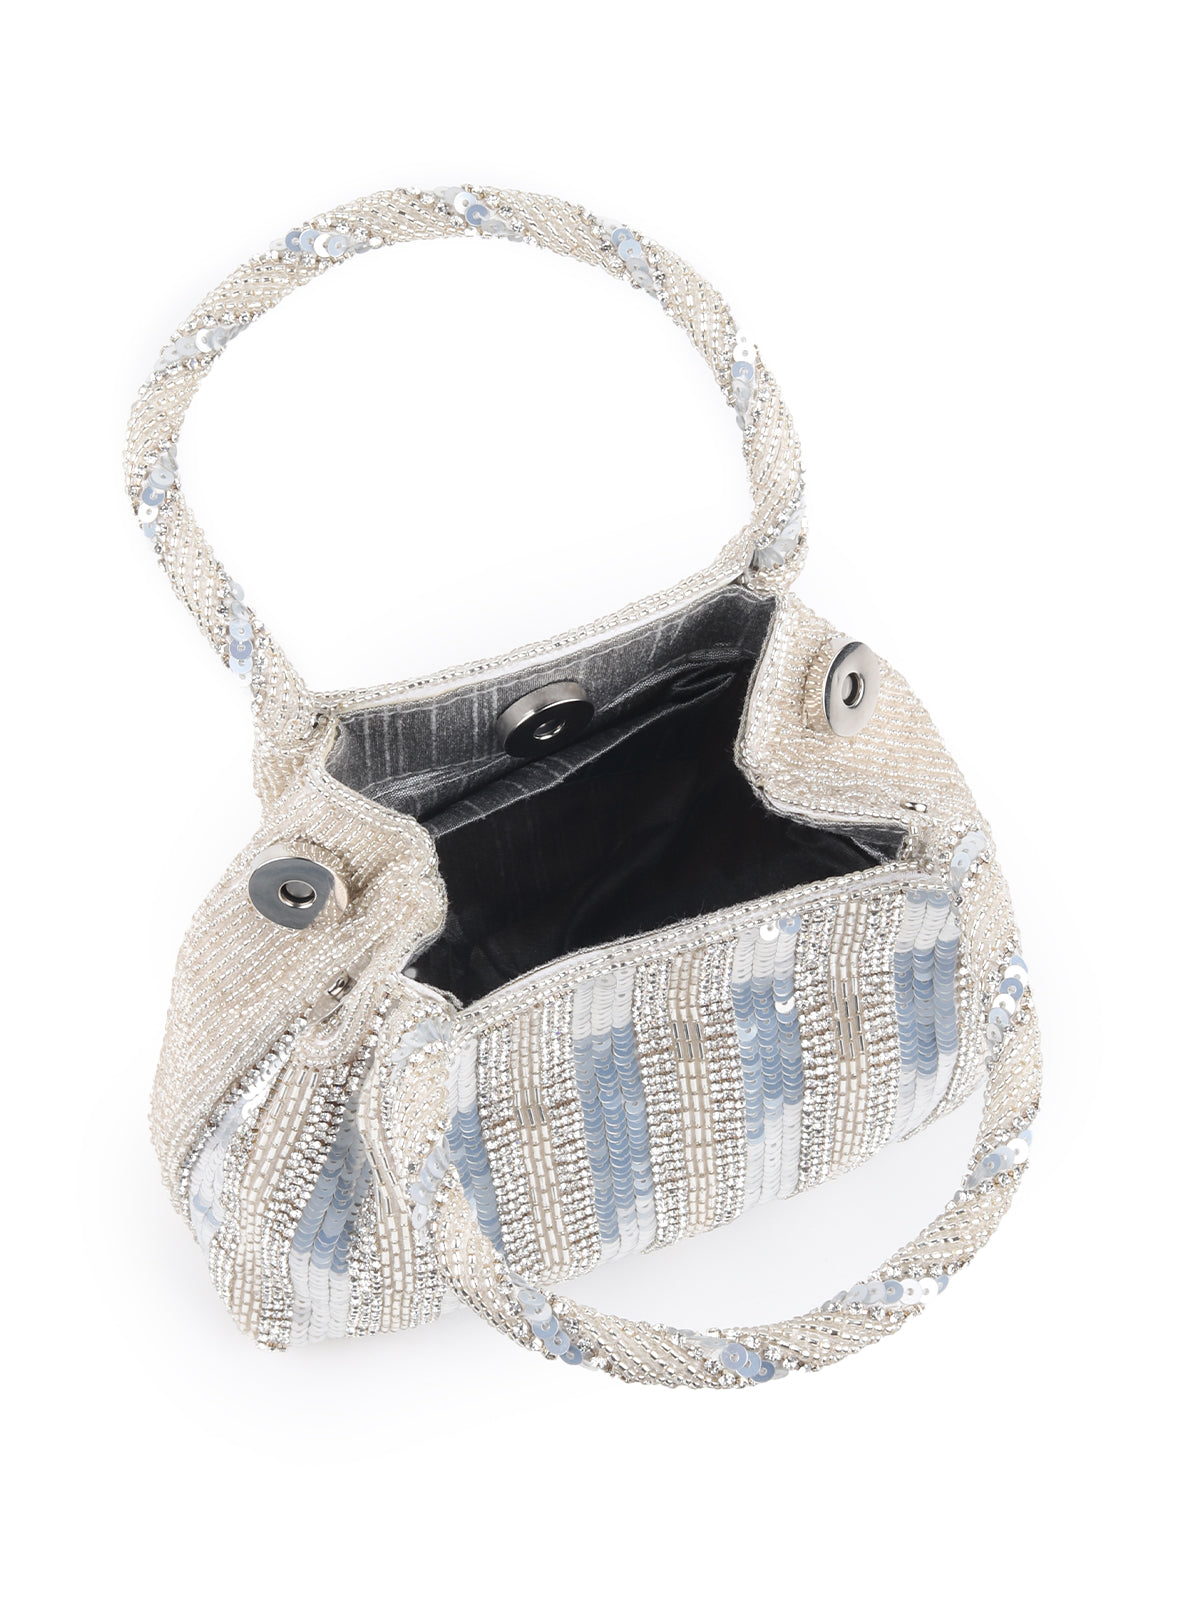 Odette Silver Stone and Beads Embroidered Clutch for Women